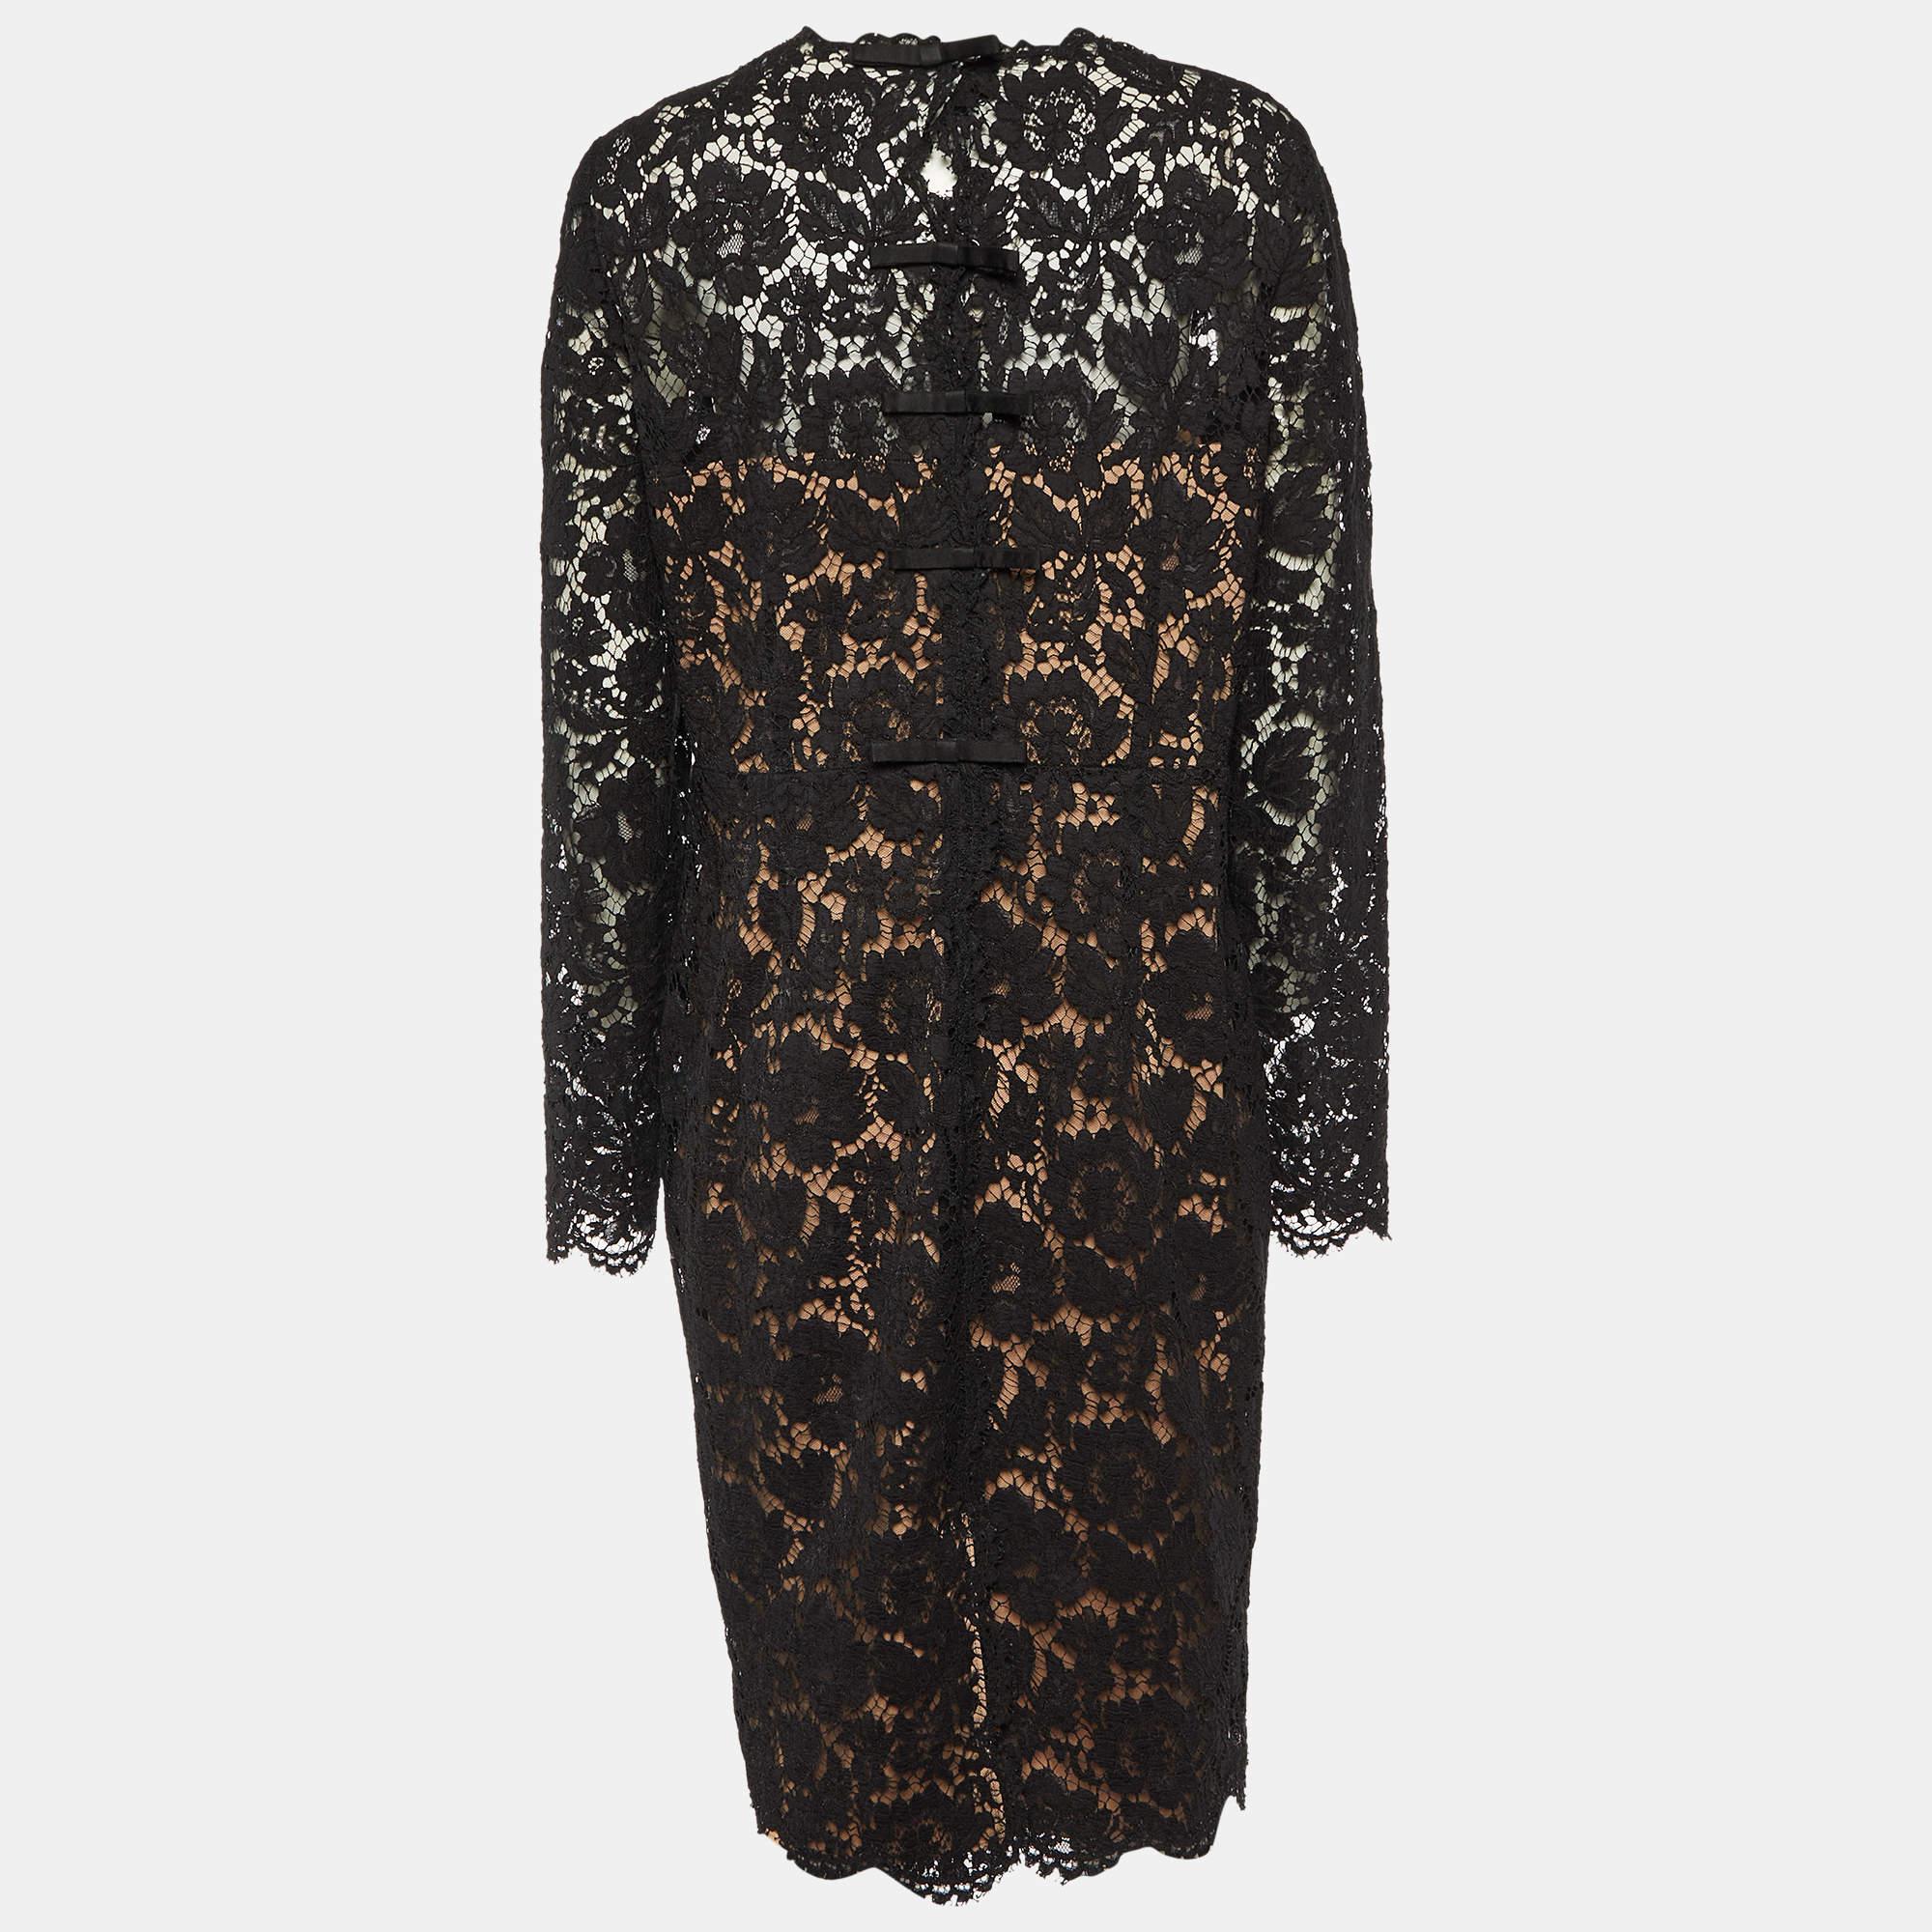 The Valentino dress exudes timeless elegance with its intricate lace detailing and form-fitting silhouette. Crafted with precision, it gracefully accentuates curves while the delicate long sleeves add a touch of sophistication, making it perfect for